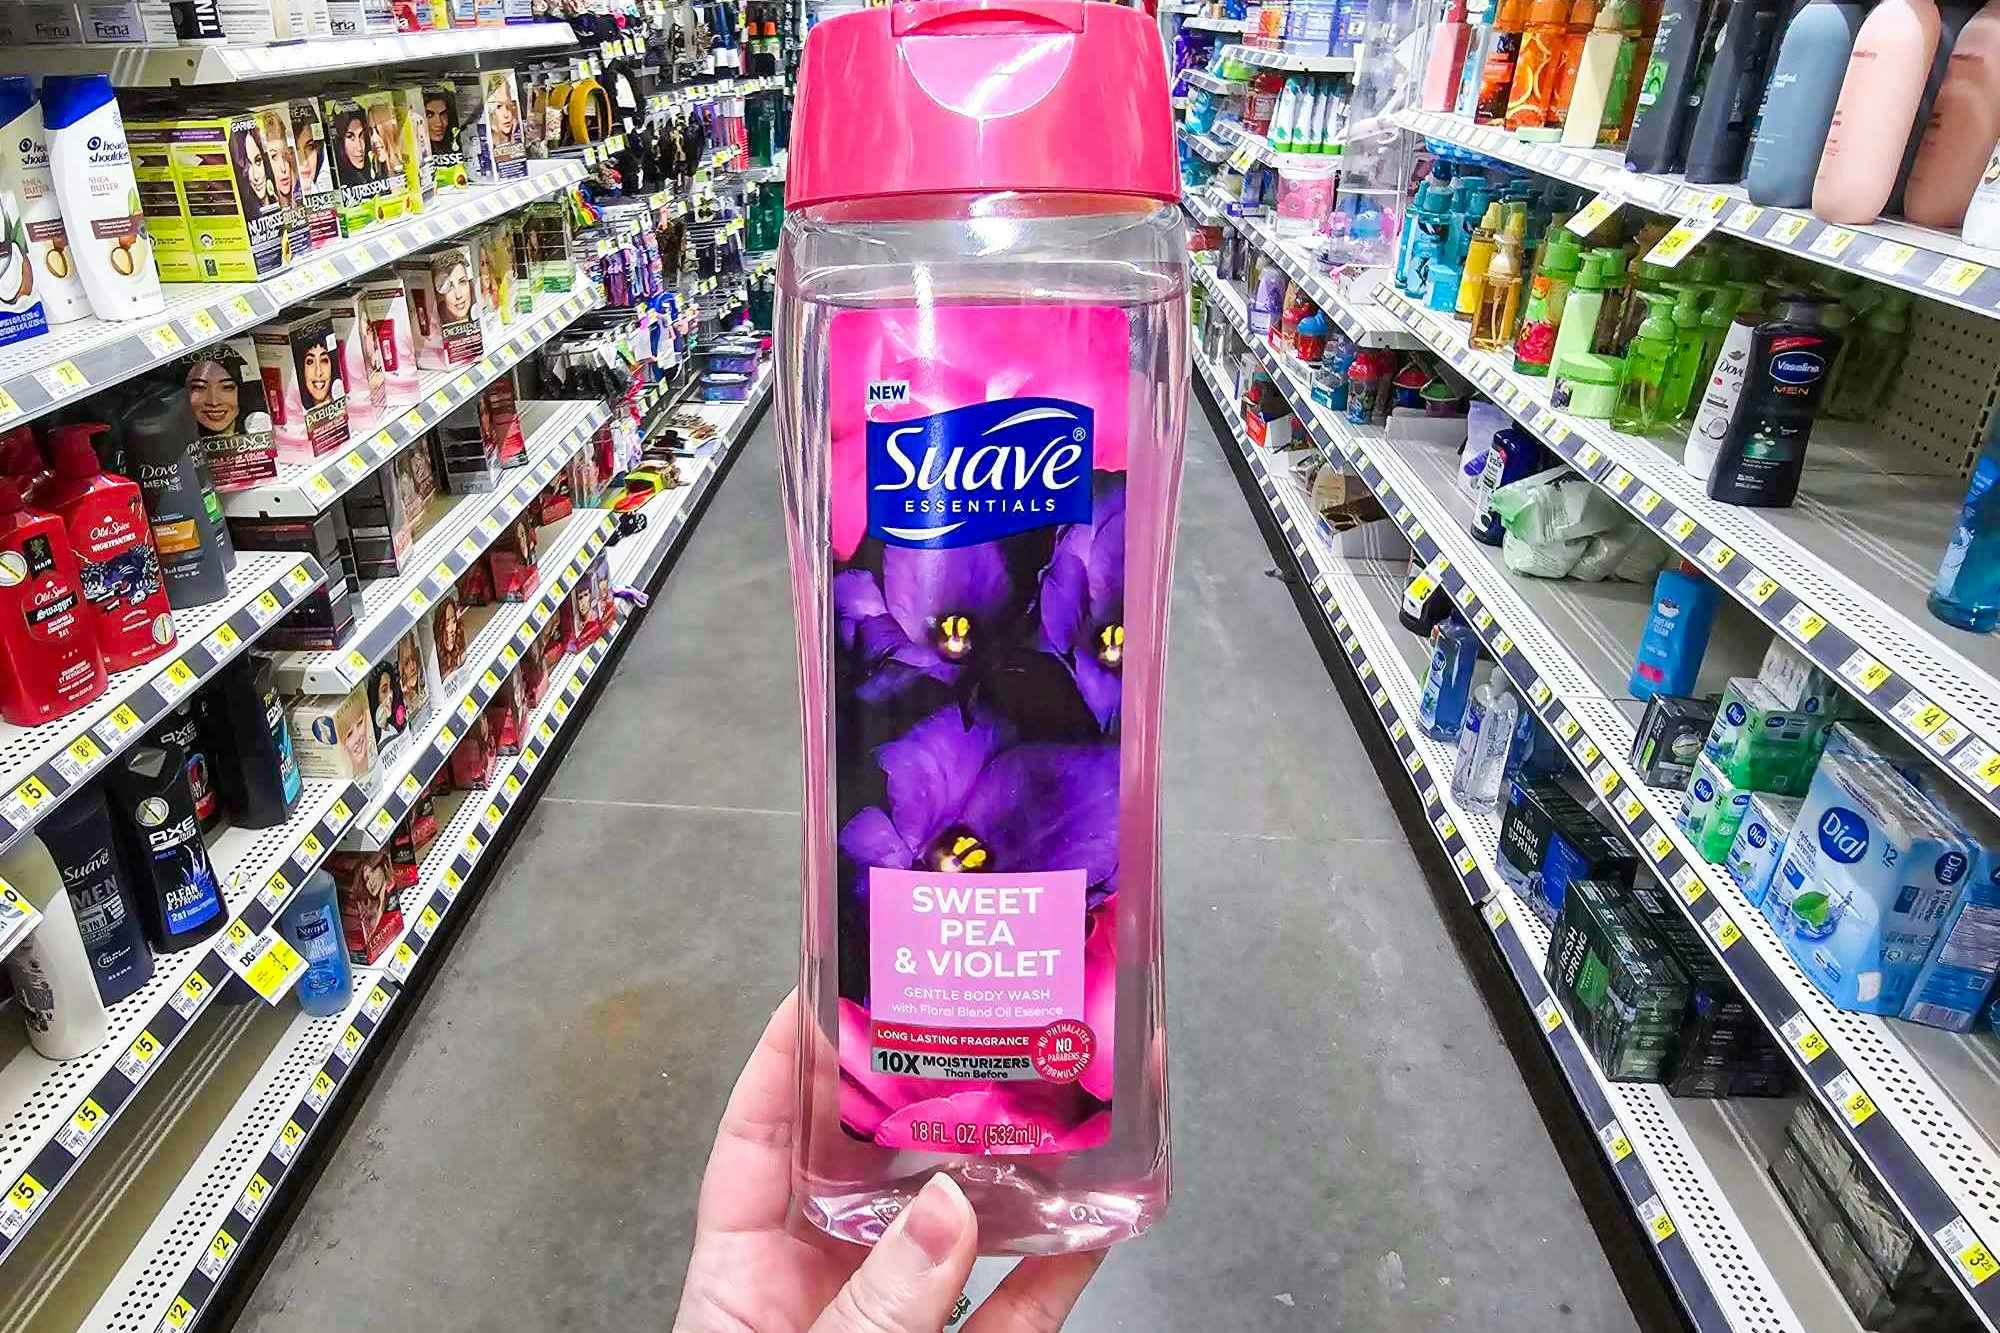 hand holding a bottle of suave essentials body wash at dollar general